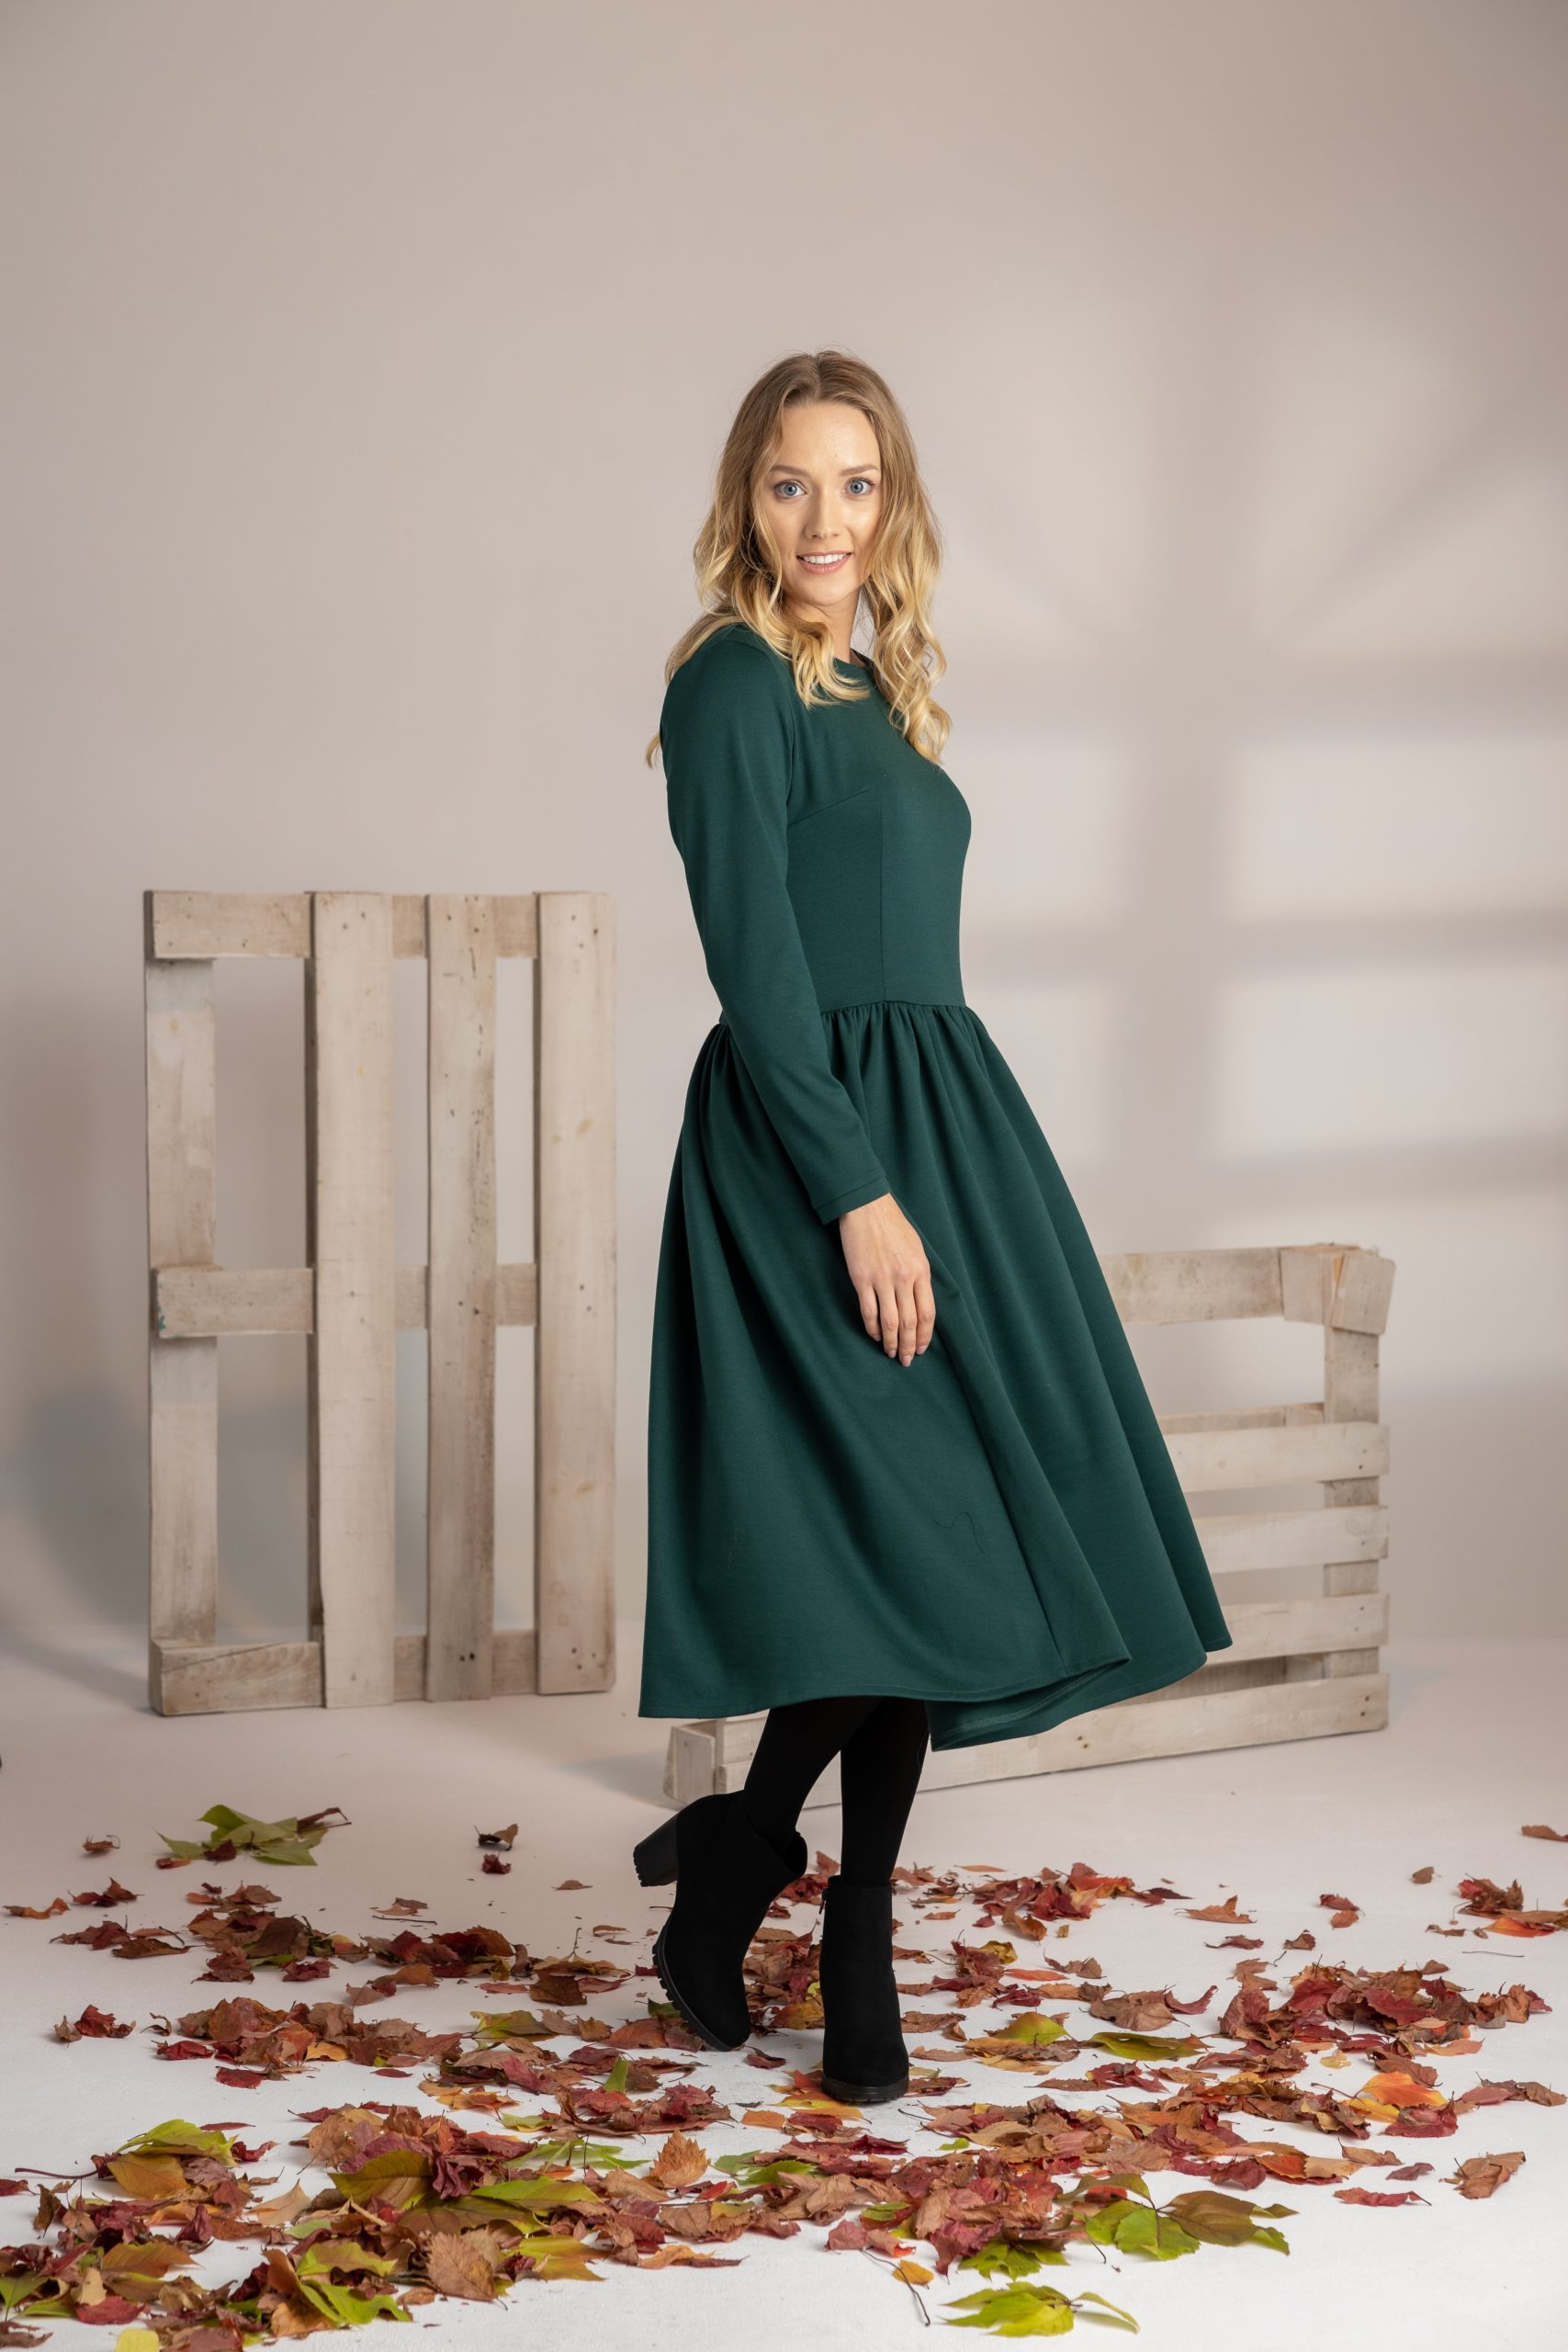 Girls Velvet Long Dress Winter Fall Maxi Gown 3/4 Sleeve Princess Party  Dresses, Green, 2-3T : Buy Online at Best Price in KSA - Souq is now  Amazon.sa: Fashion